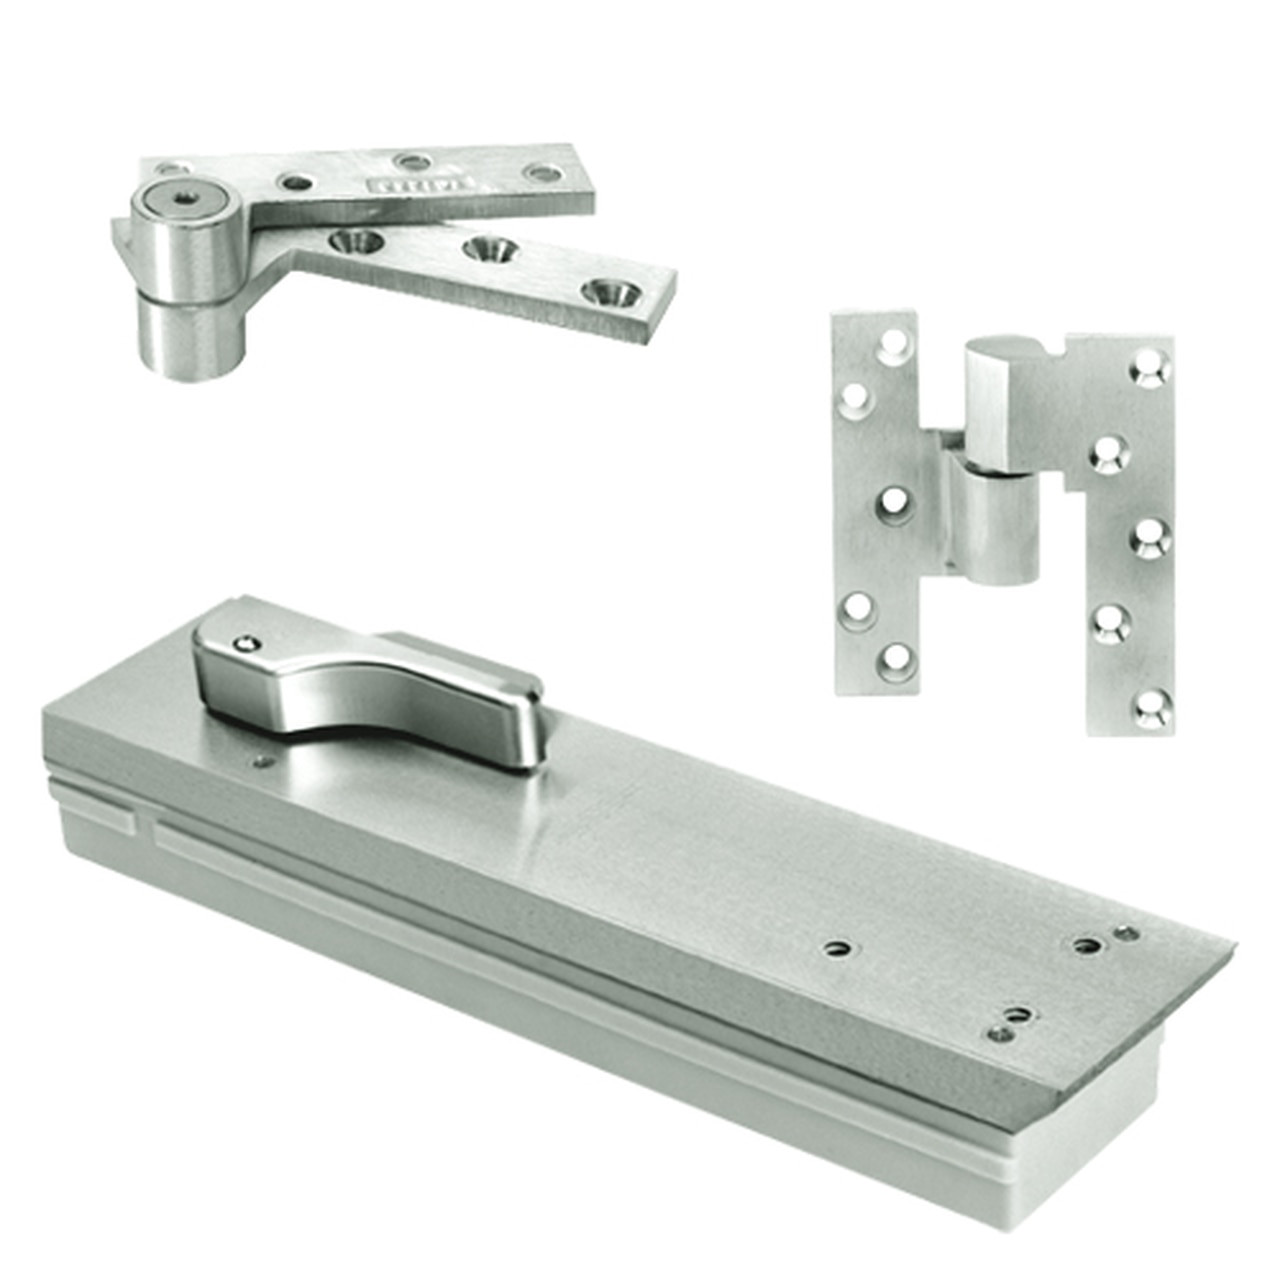 FQ5104NBC-LFP-LCC-LH-618 Rixson Q51 Series Fire Rated 3/4" Offset Hung Shallow Depth Floor Closers in Bright Nickel Finish